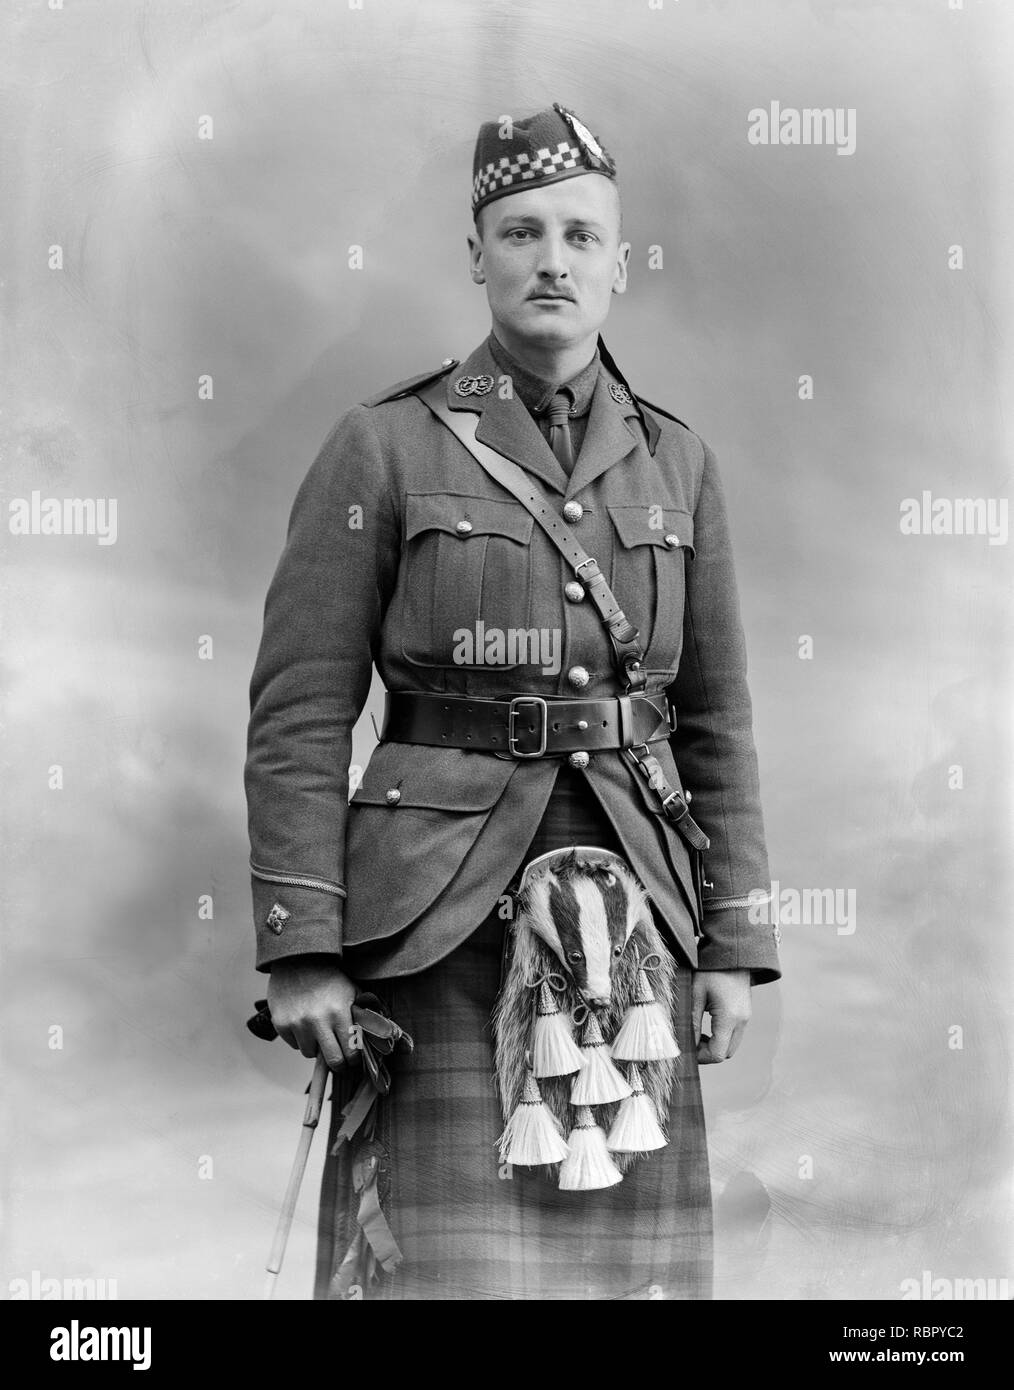 Photograph taken on 29th May 1915. 2nd Lieutenant R. Angus Clay of the Argyll and Sutherland Highlanders, a regiment of the British Army. Photograph taken in the famous London Studio of Bassano. Stock Photo